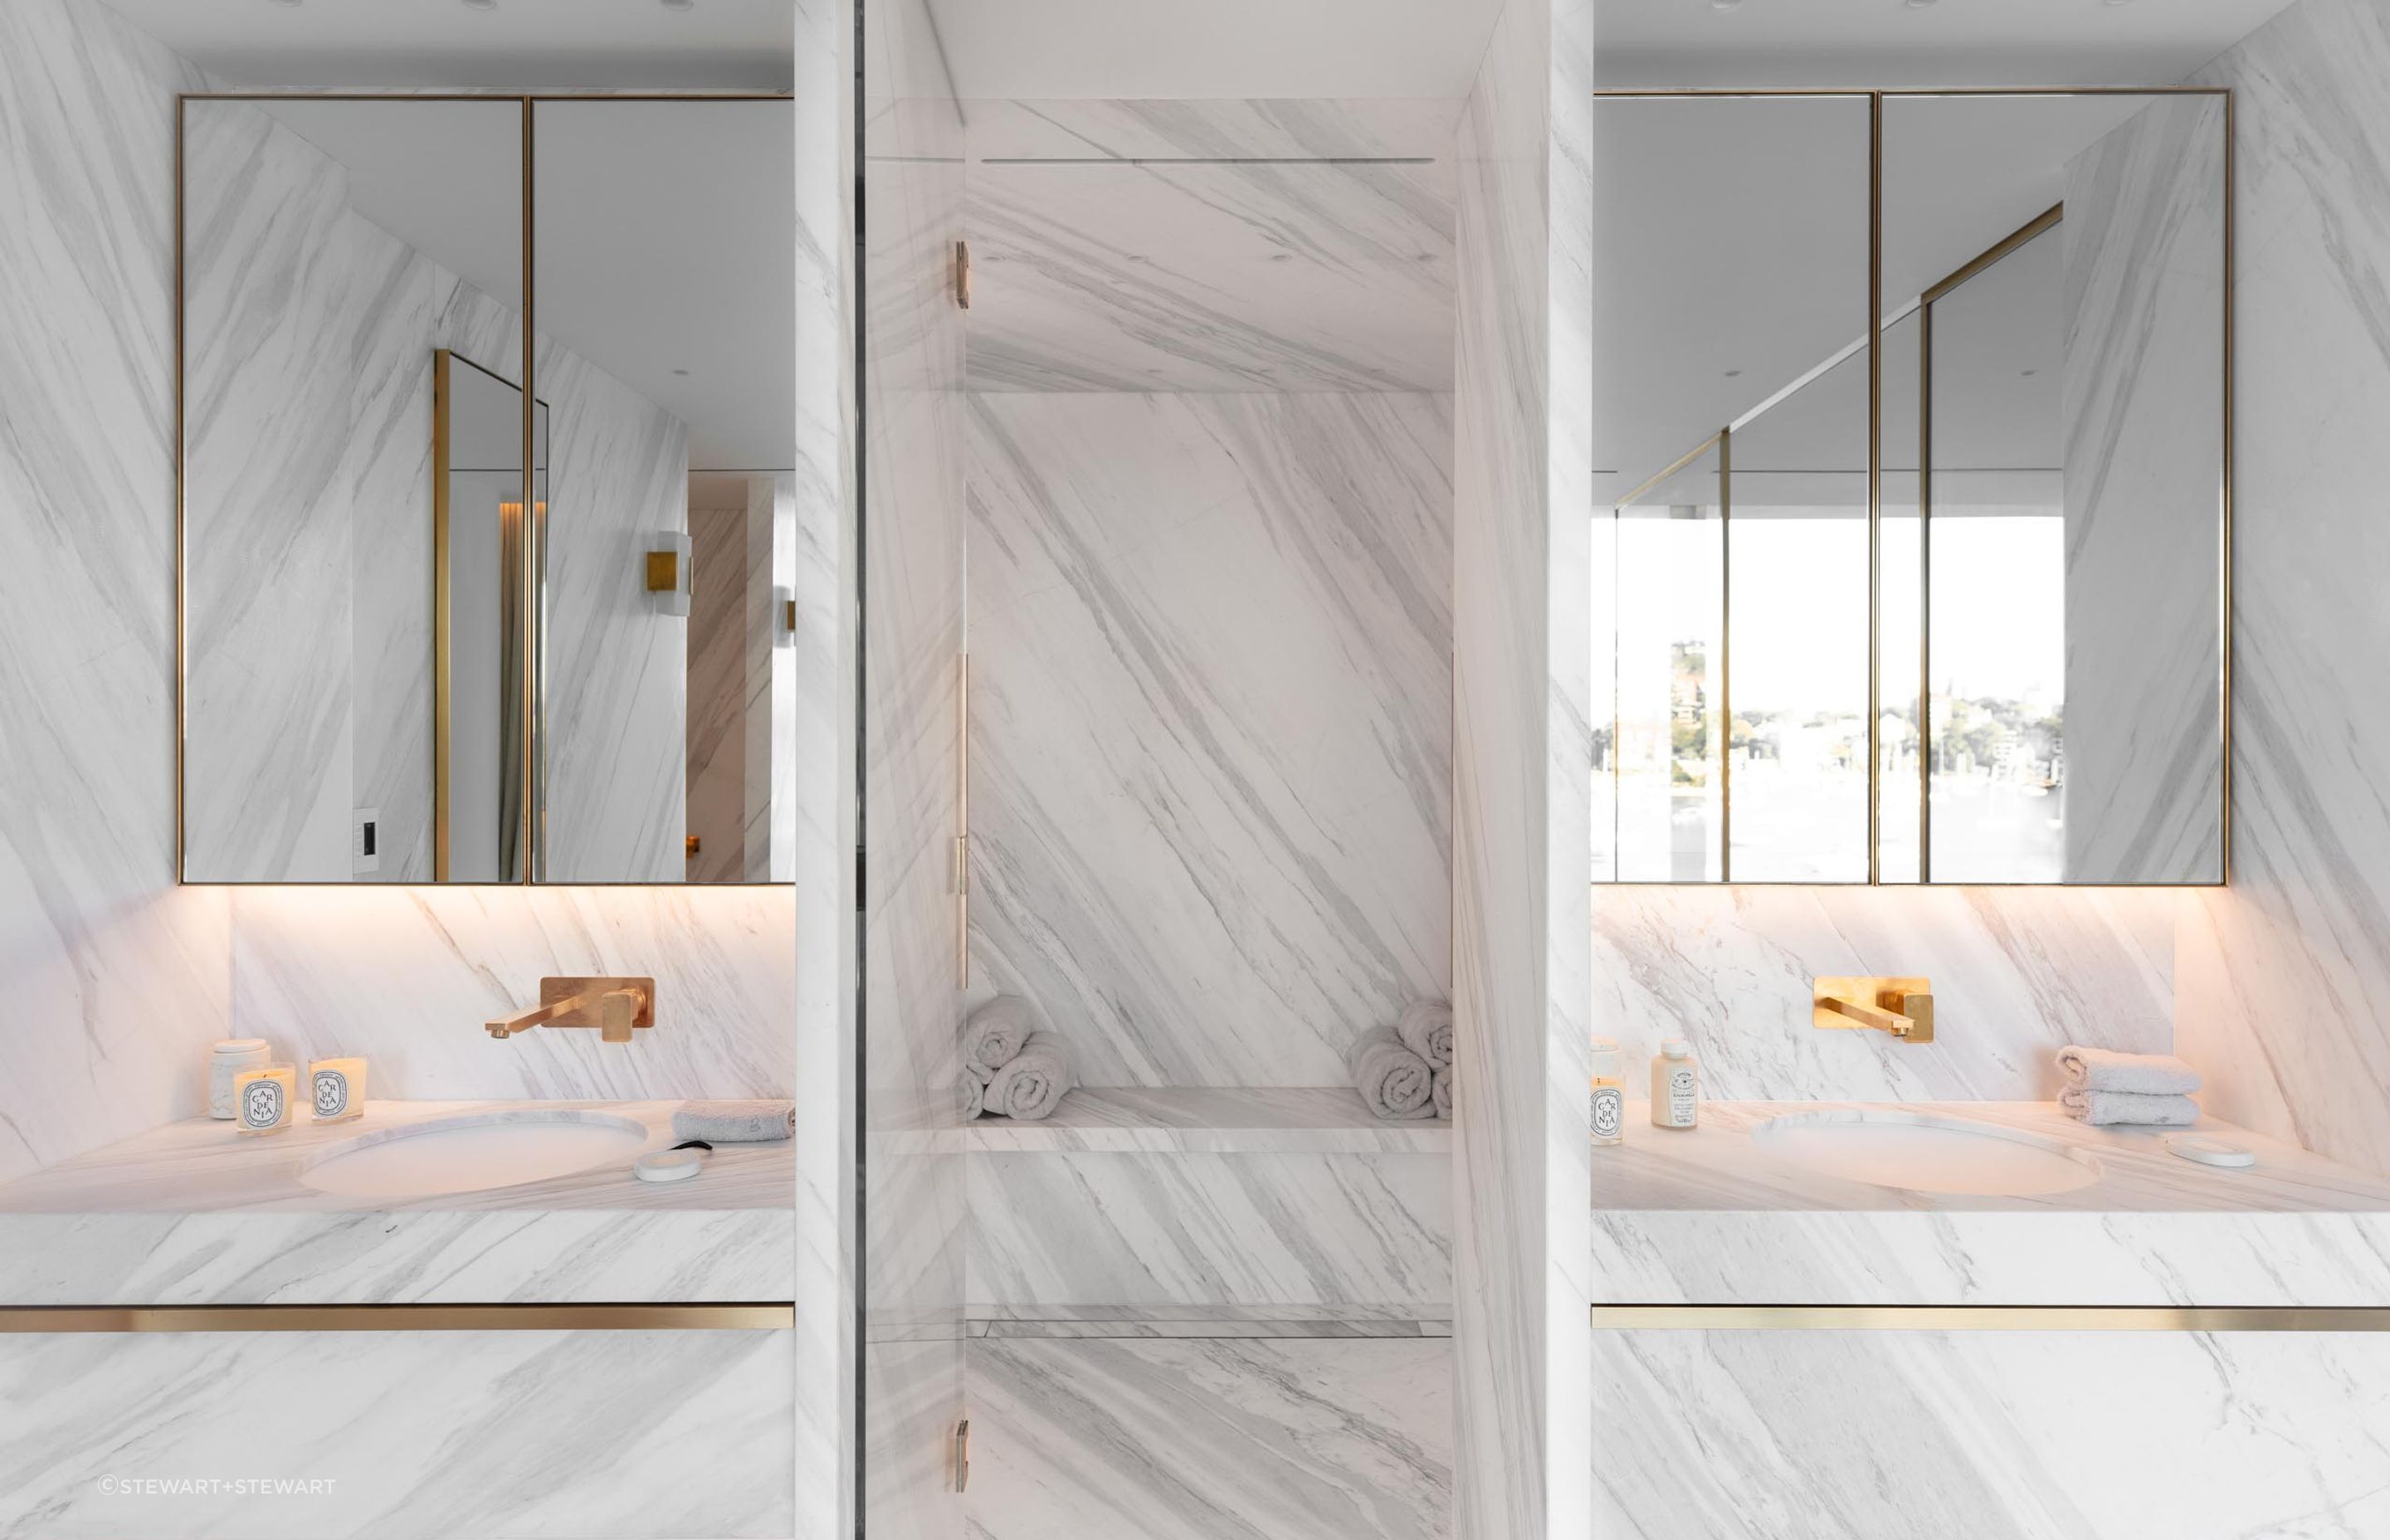 Imperial White marble brings an air of elegance and luxury throughout.